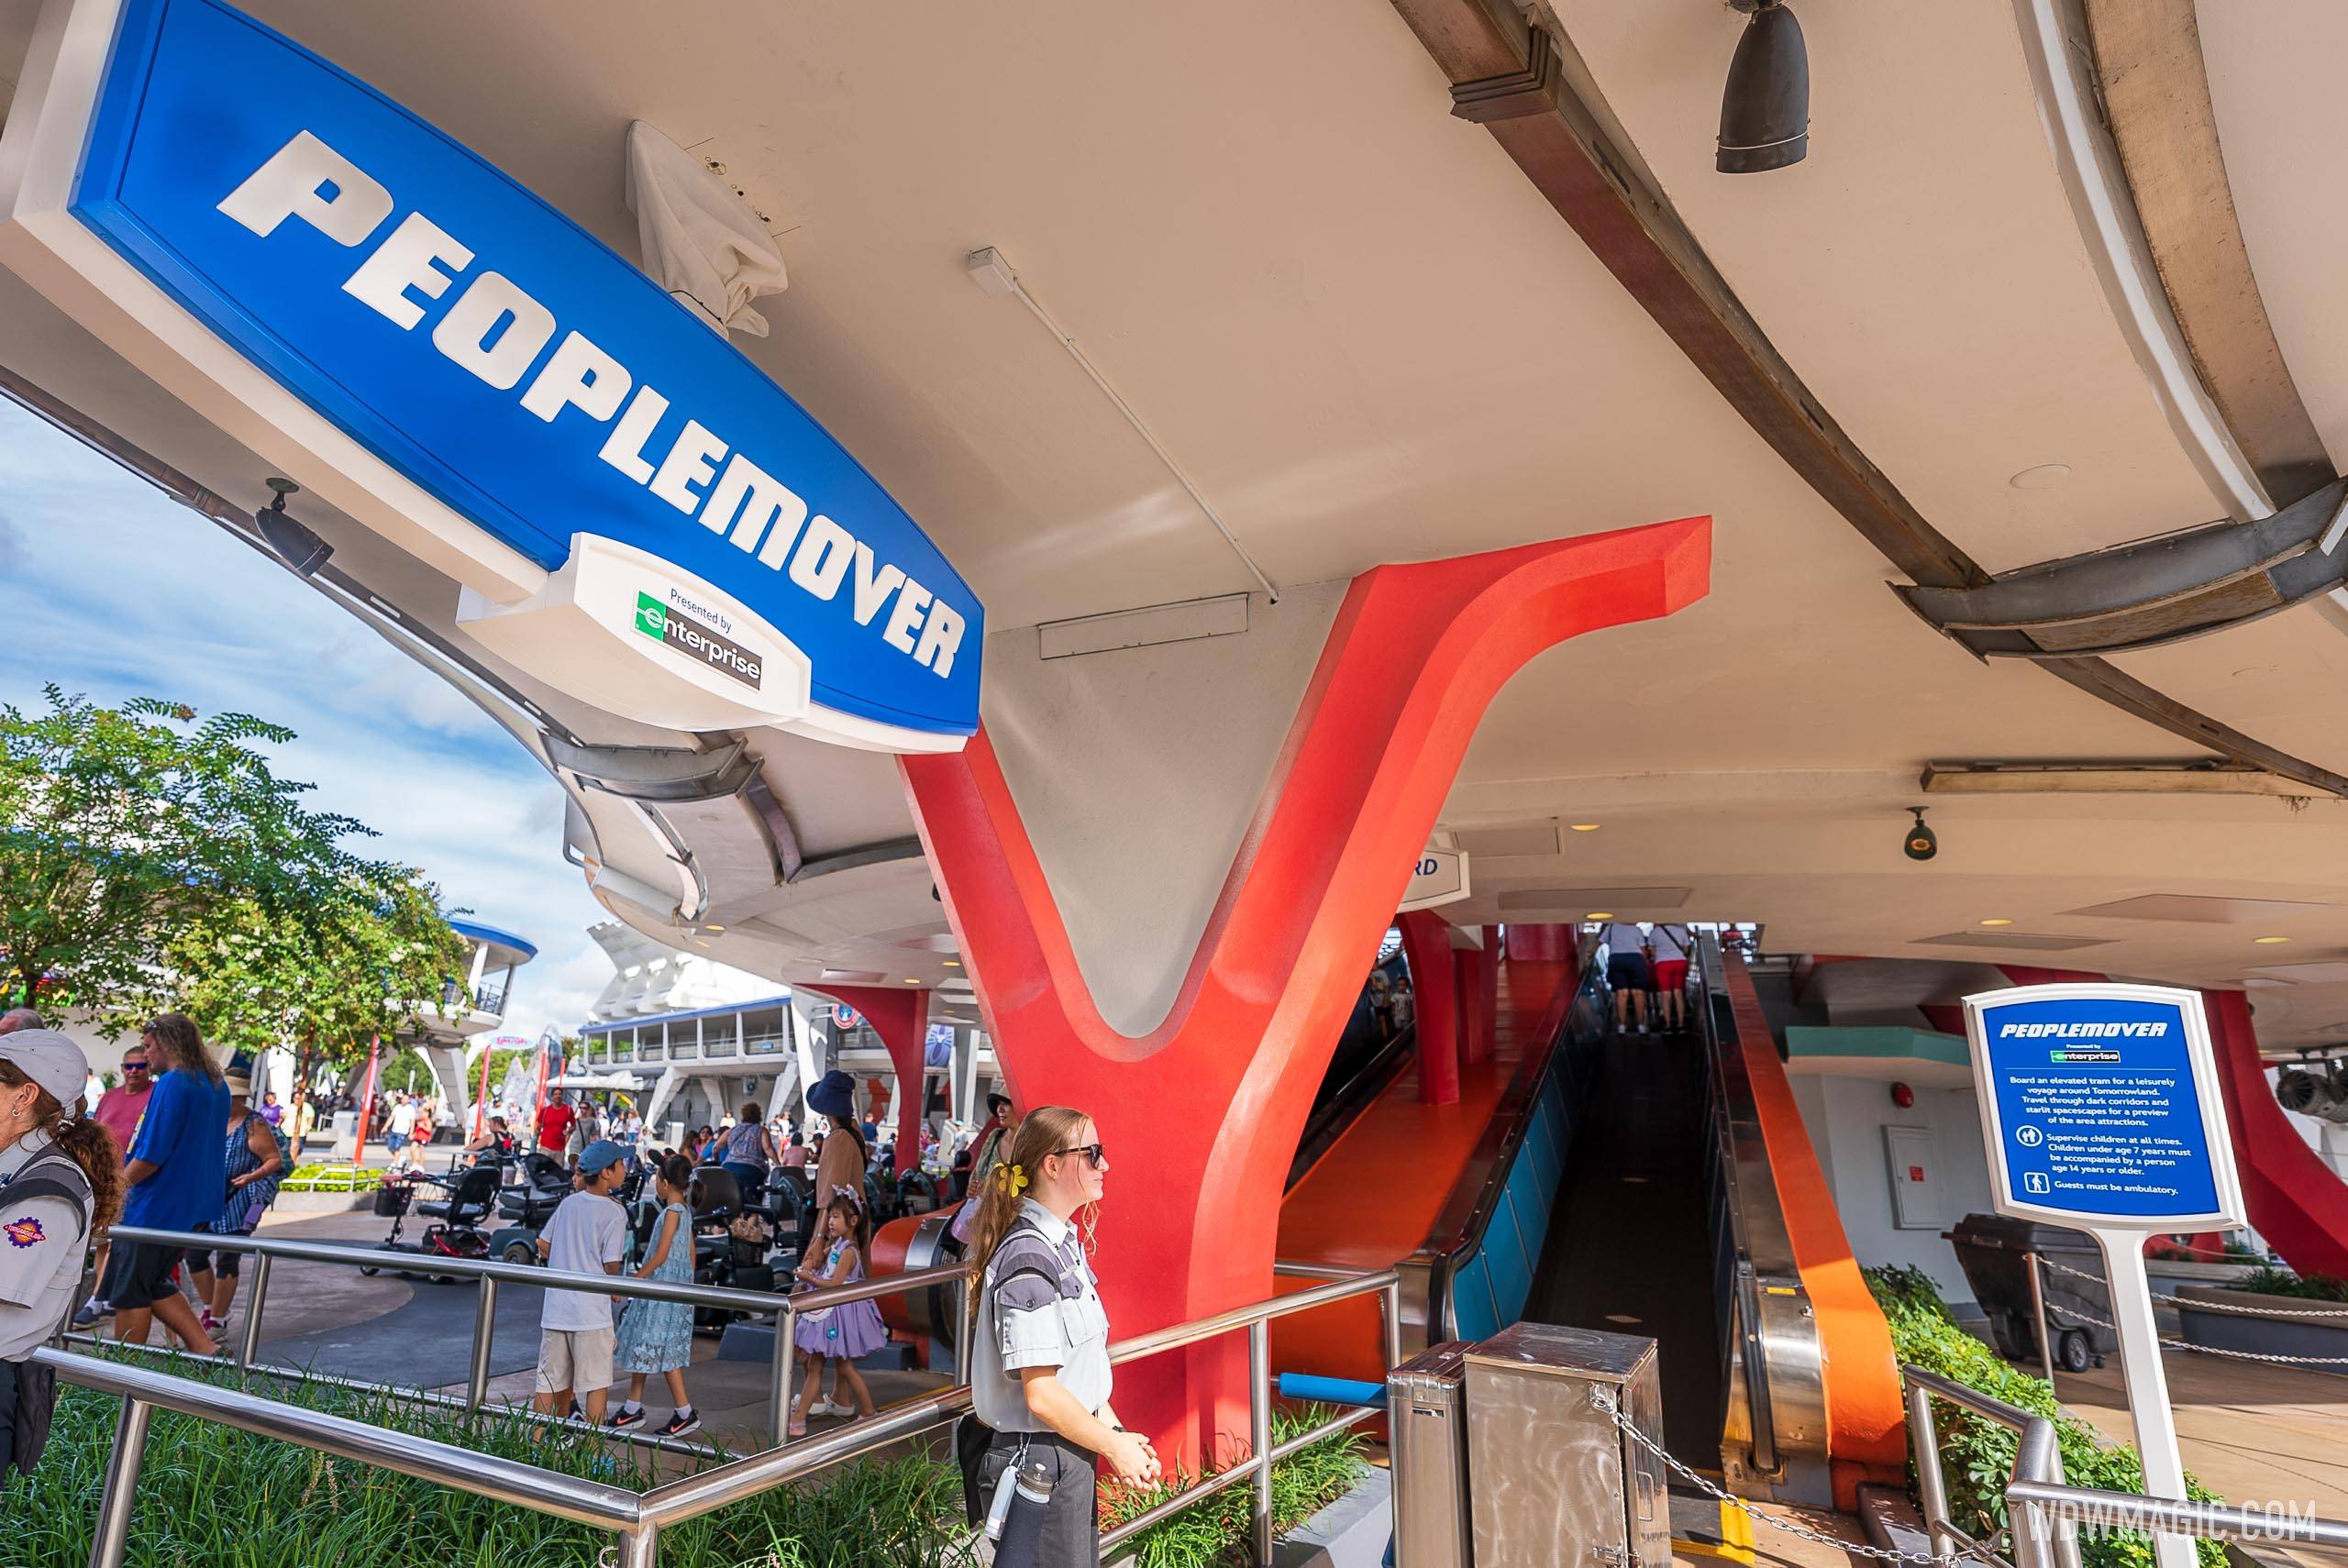 New signage at Tomorrowland Transit Authority PeopleMover - August 2022